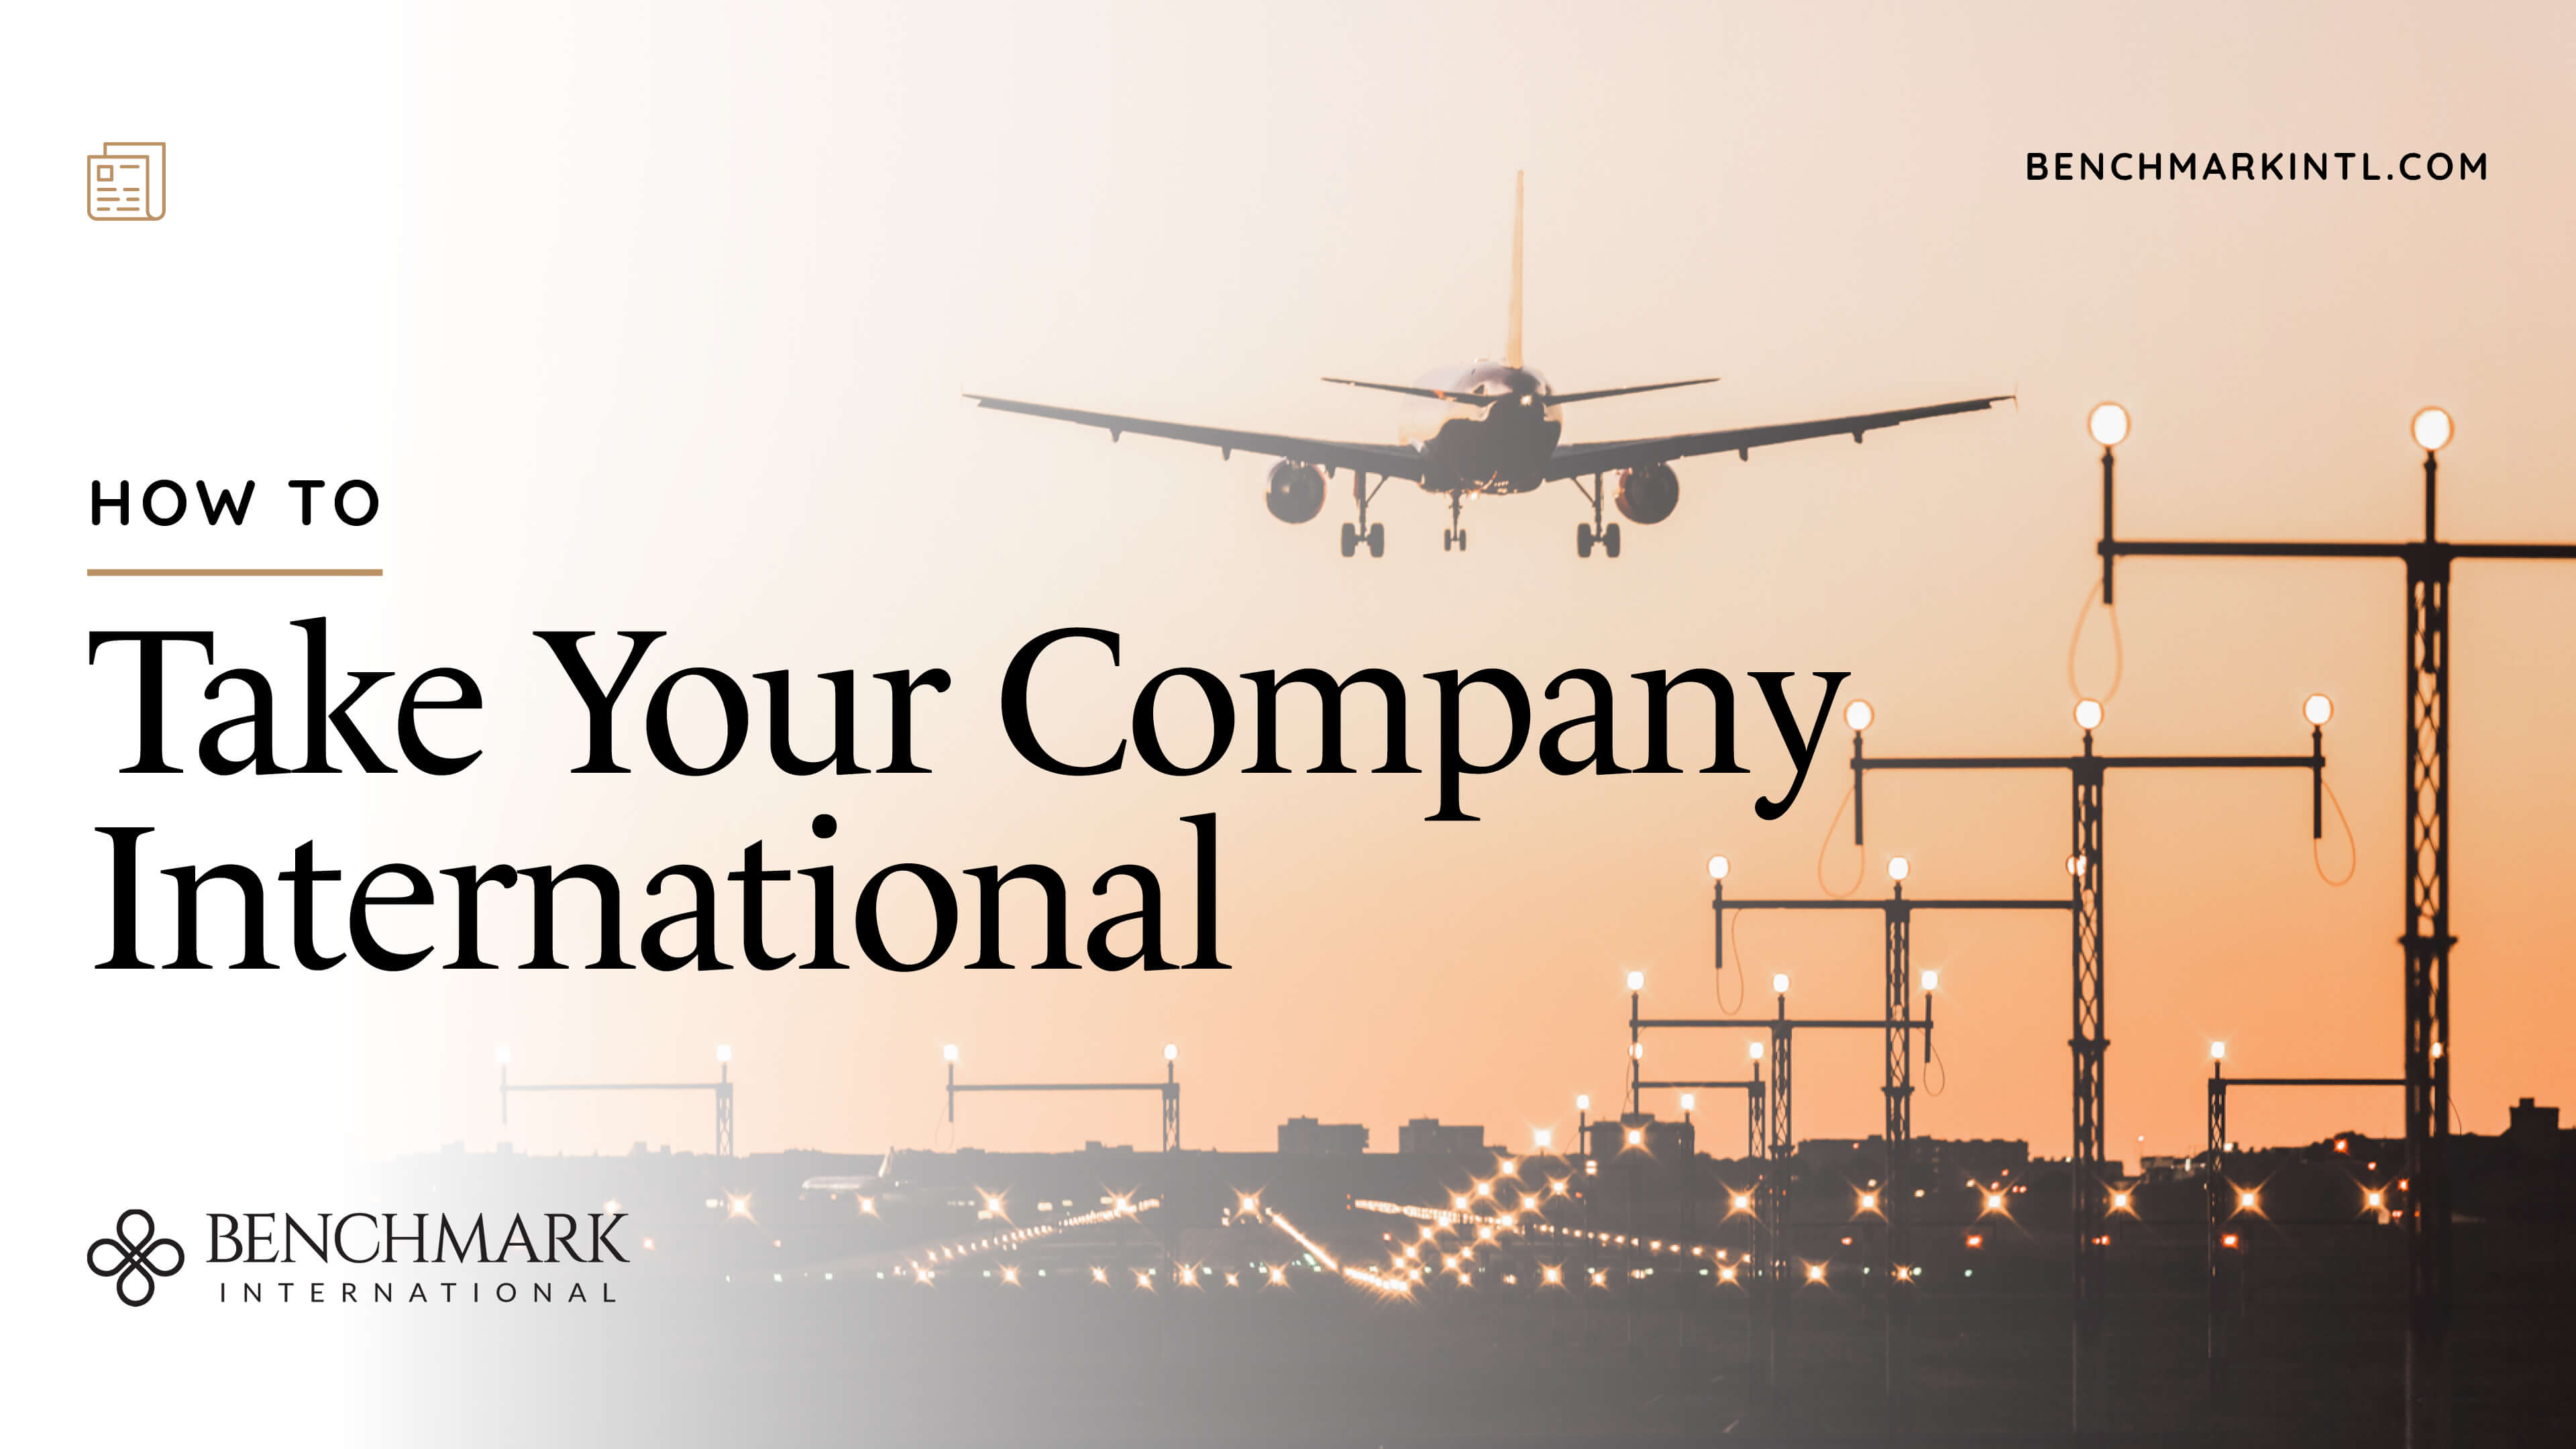 HOW TO TAKE YOUR COMPANY INTERNATIONAL